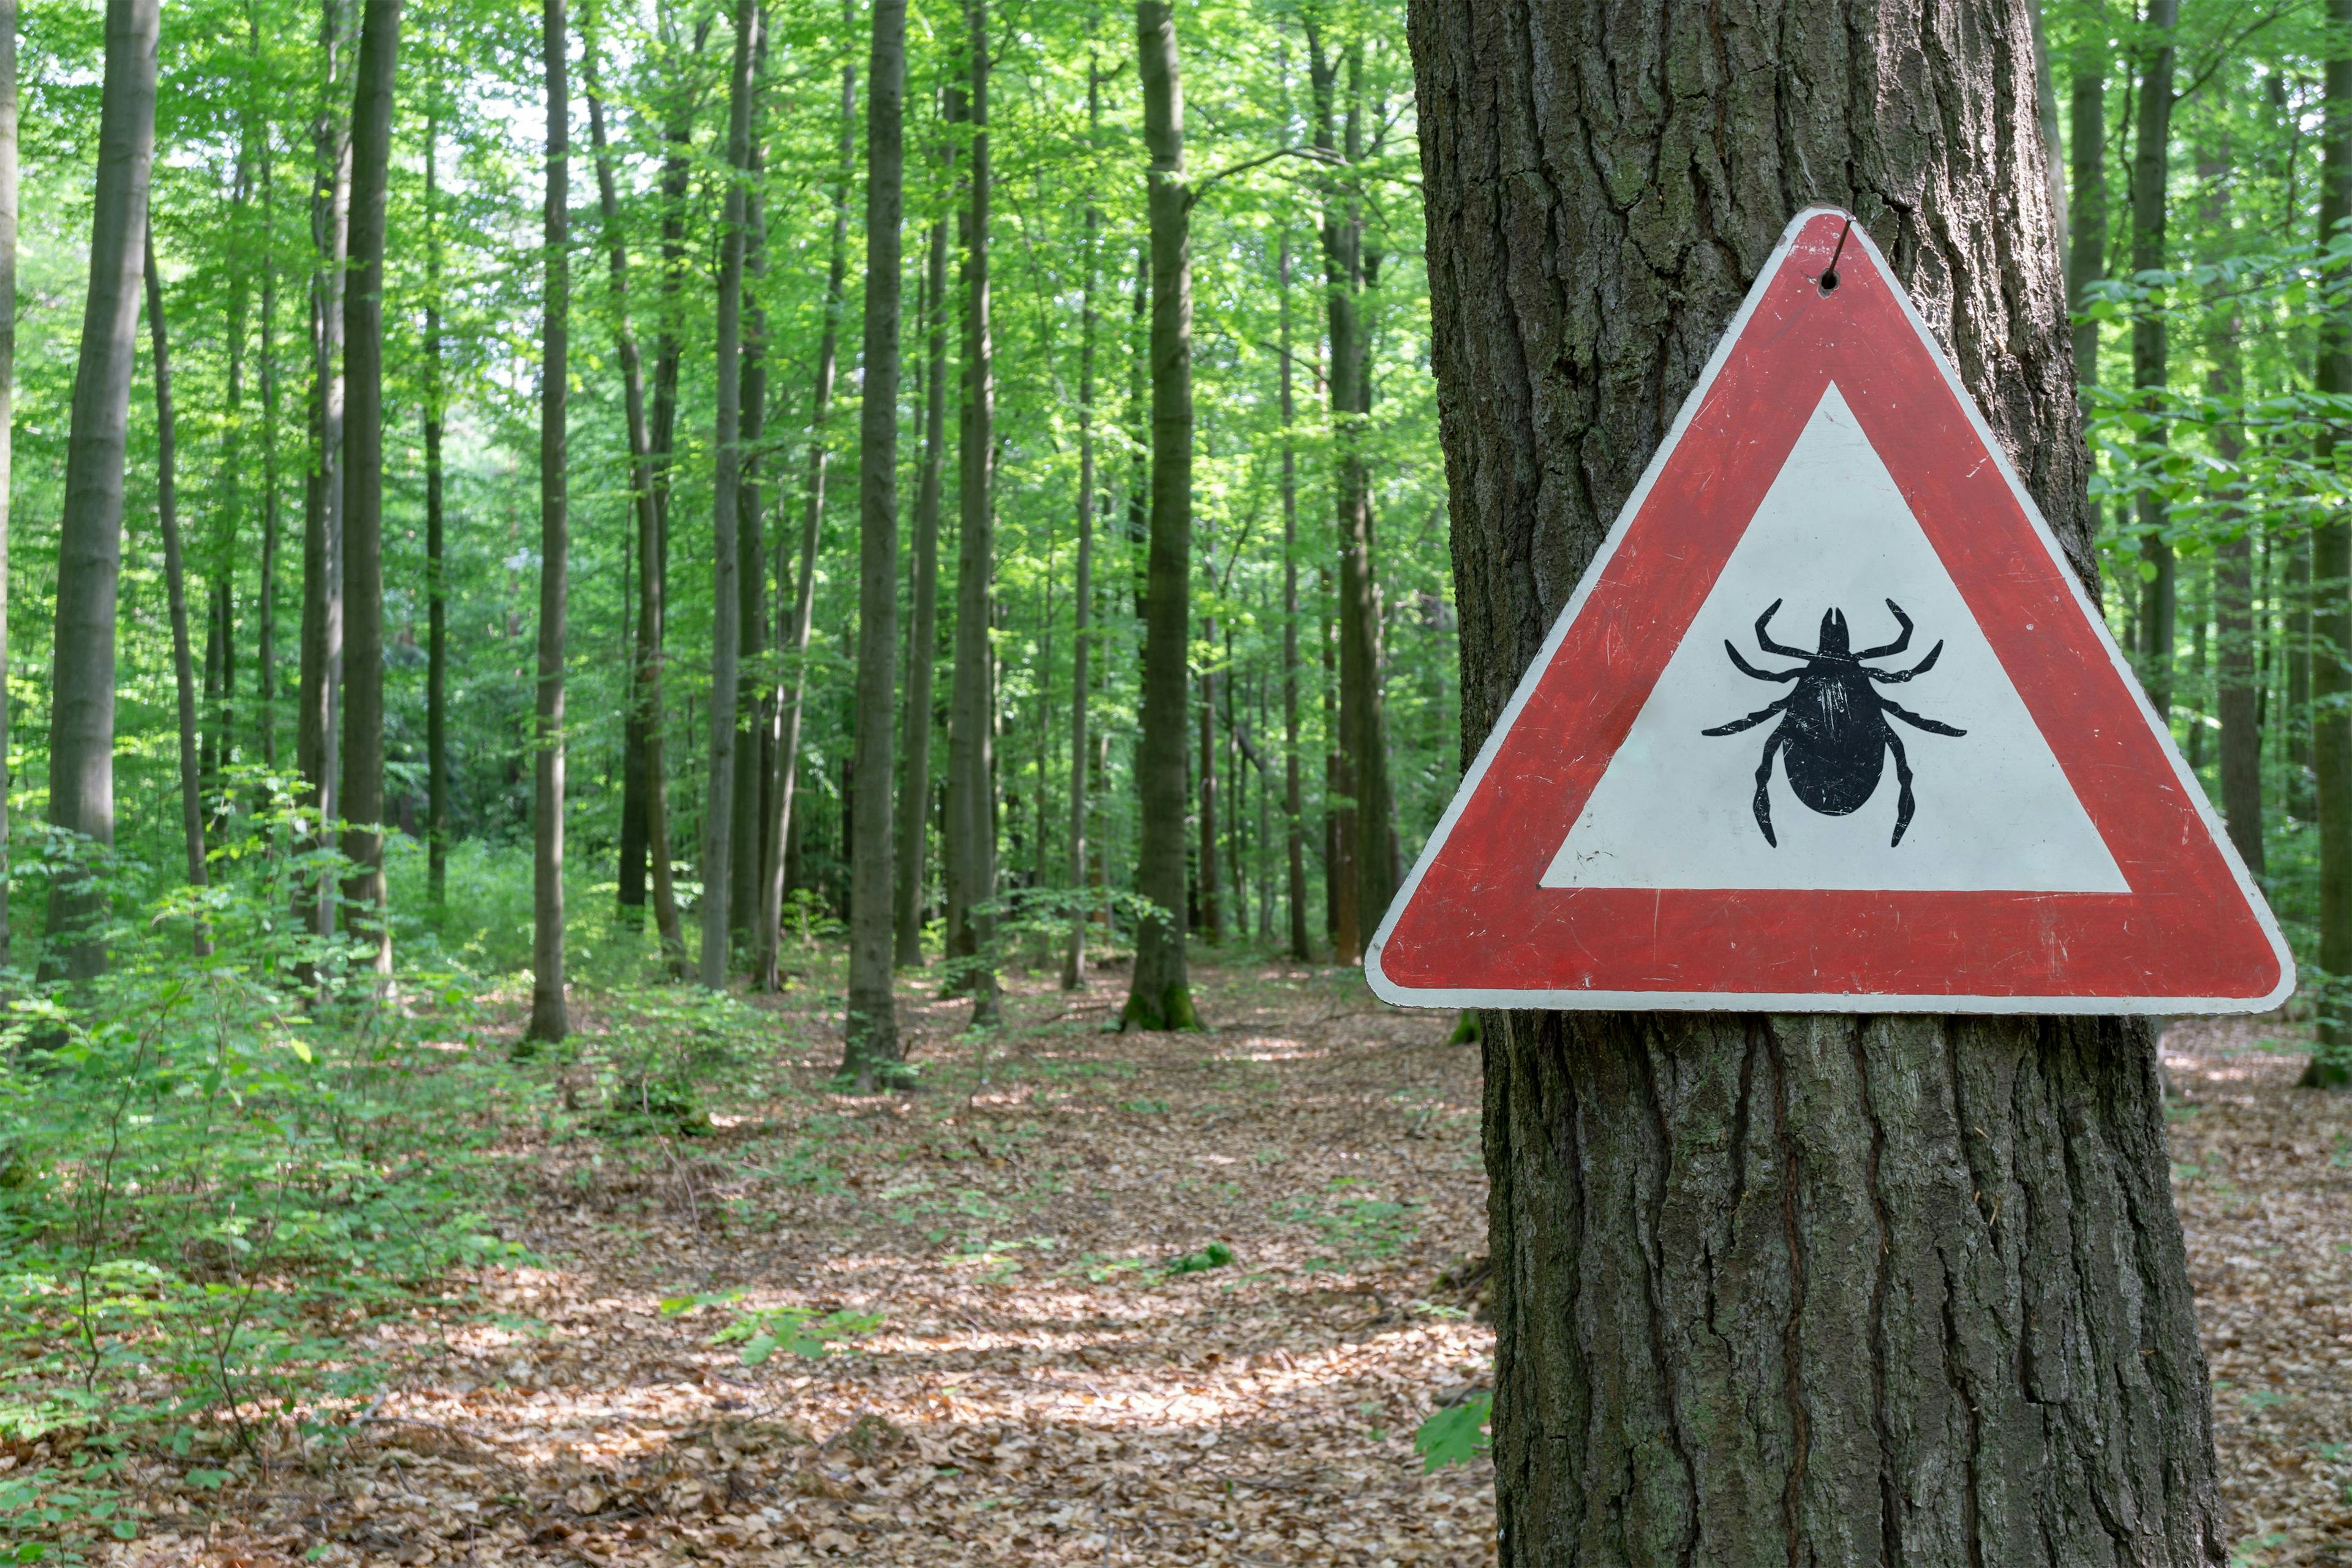 Lyme Disease in Psychiatry: Controversies, Chronic Symptoms, and Recent Developments